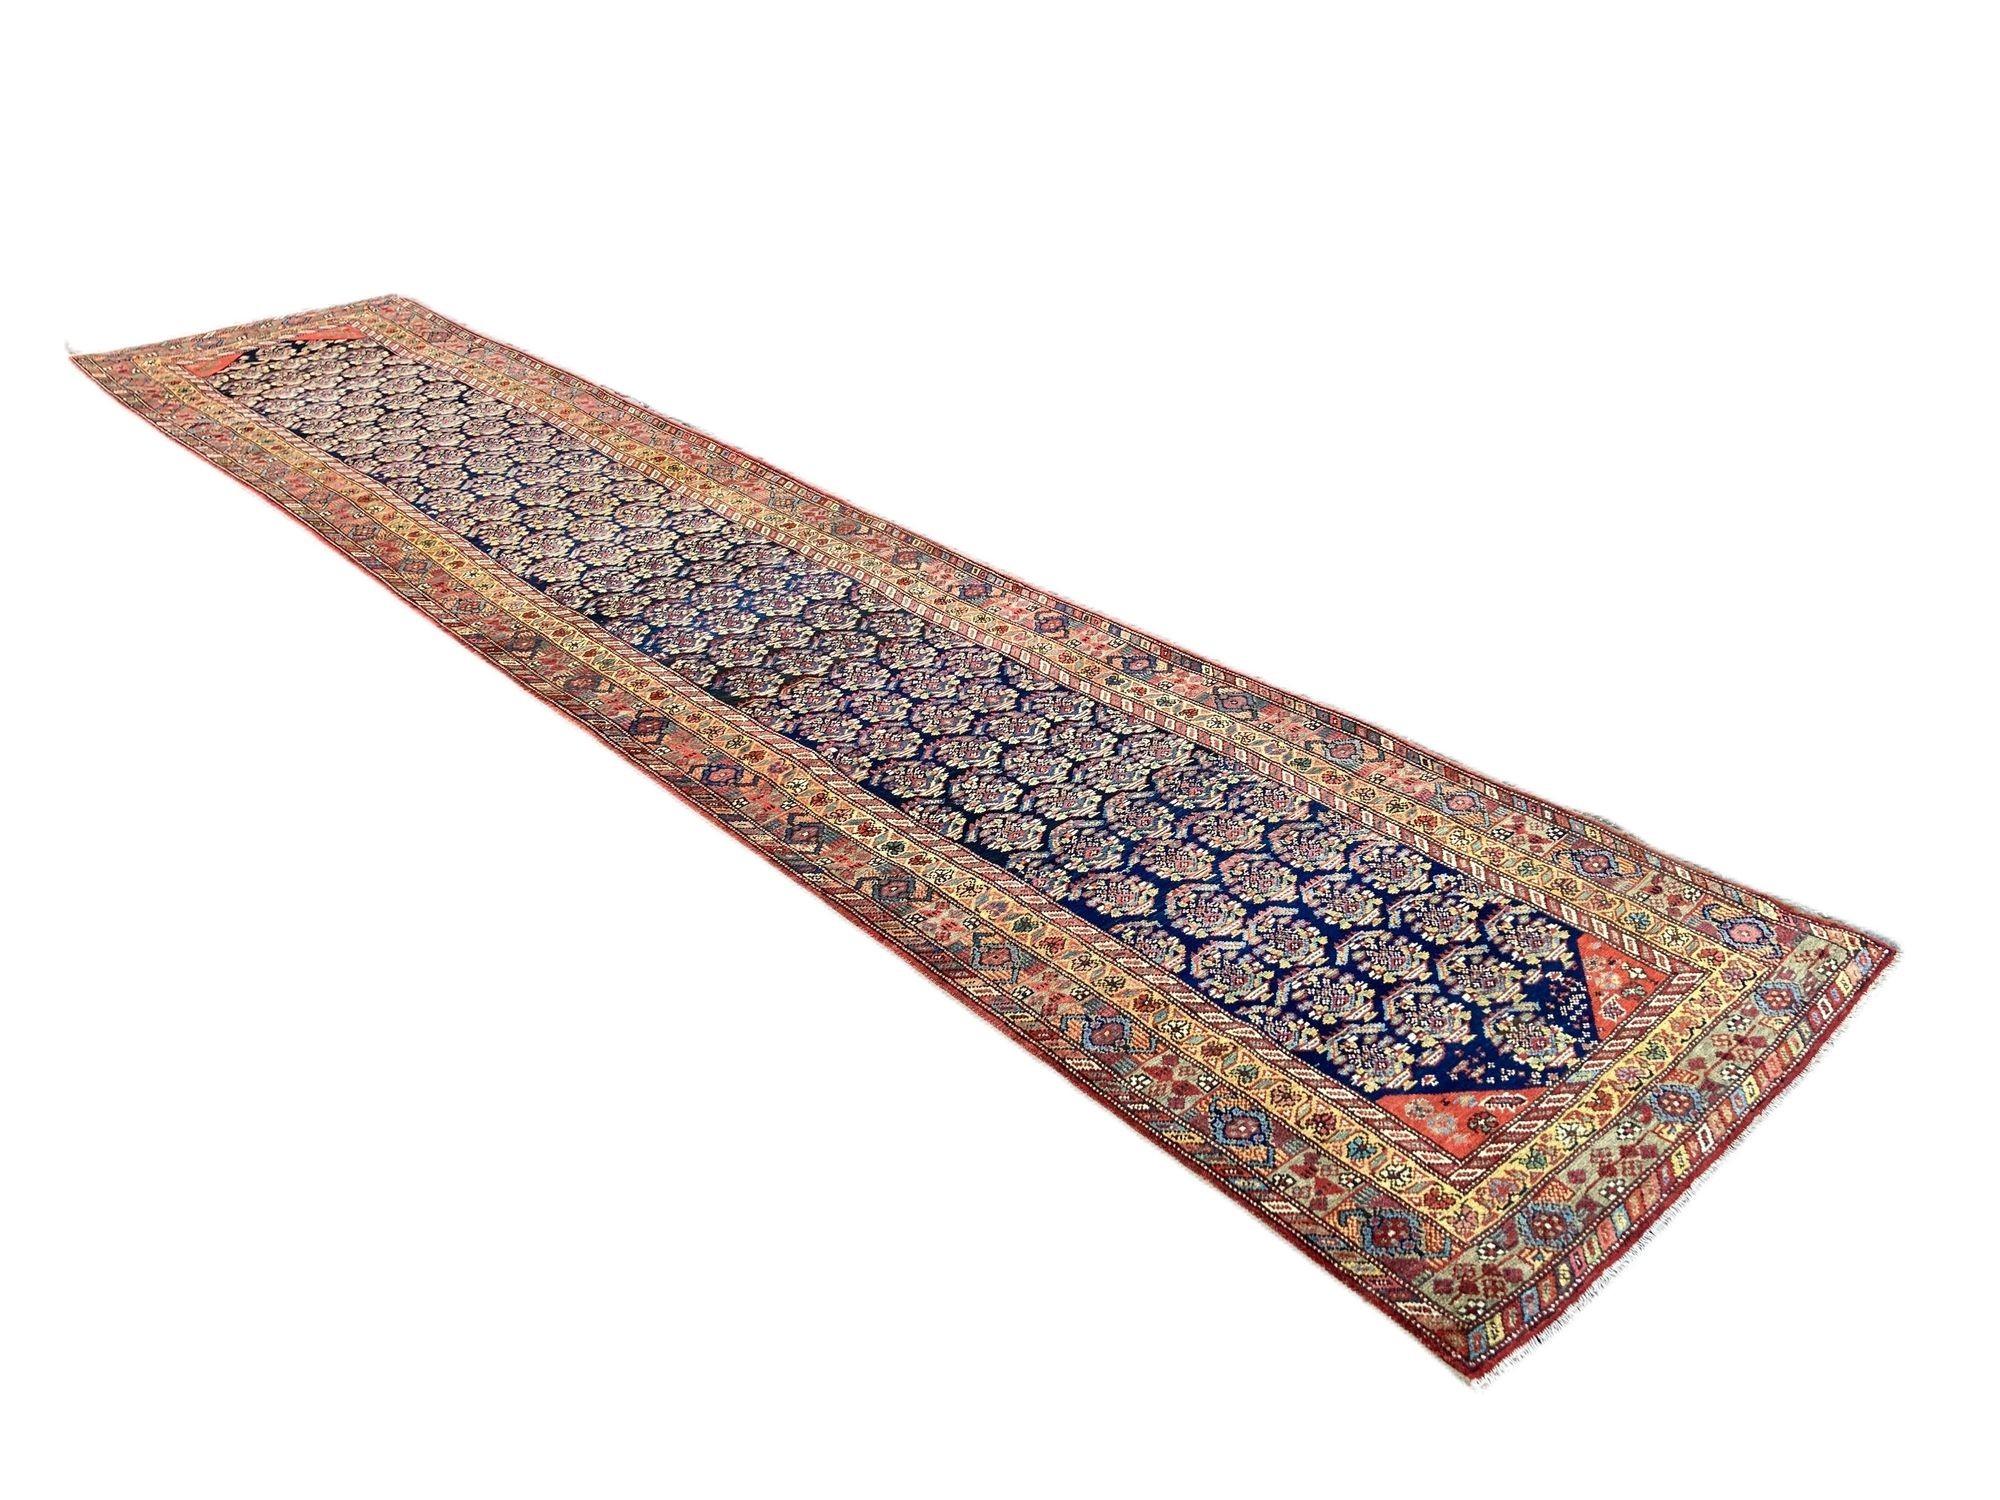 Antique Malayer Runner 4.96m x 1.10m In Good Condition For Sale In St. Albans, GB